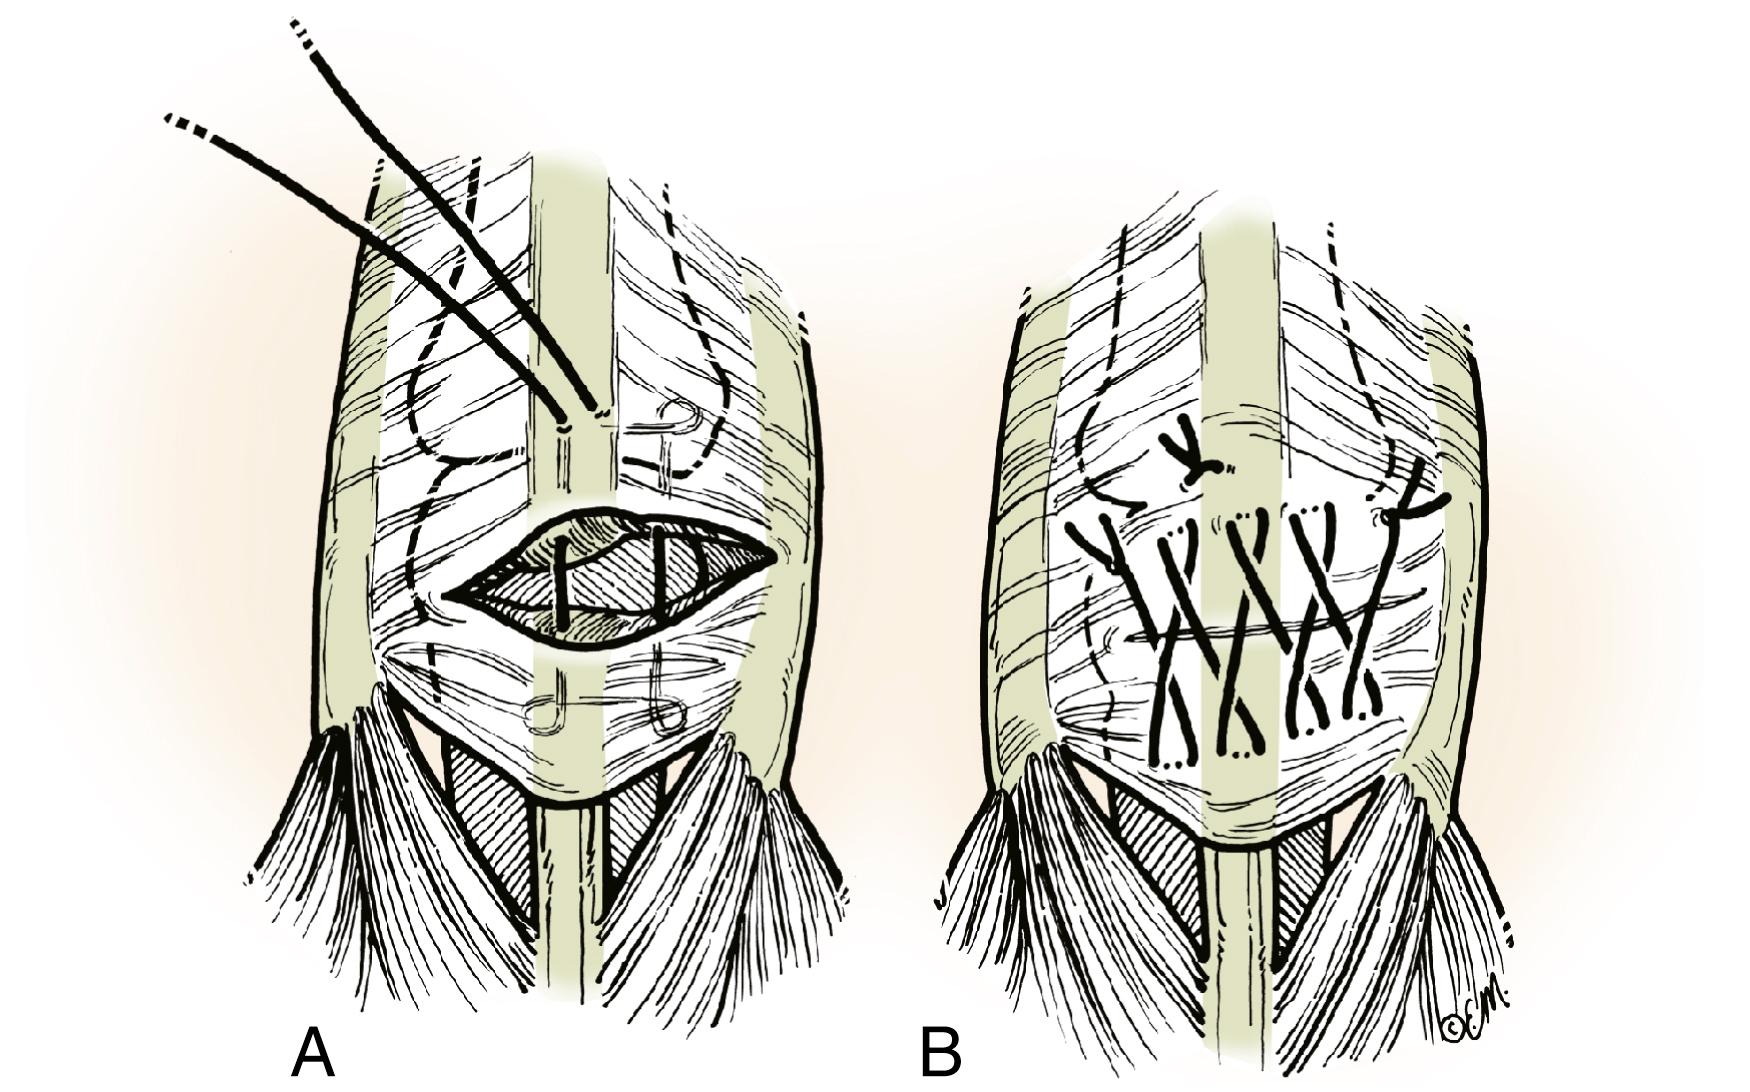 Fig. 5.14, Lacerations over MP joint (zone 5) are in a region of increased thickness and substance compared with the extensor tendon mechanism distally. A and B, The author’s preferred technique for repair of lacerations in this zone includes the modified Kessler (A) , followed by the cross-stitch (B) .